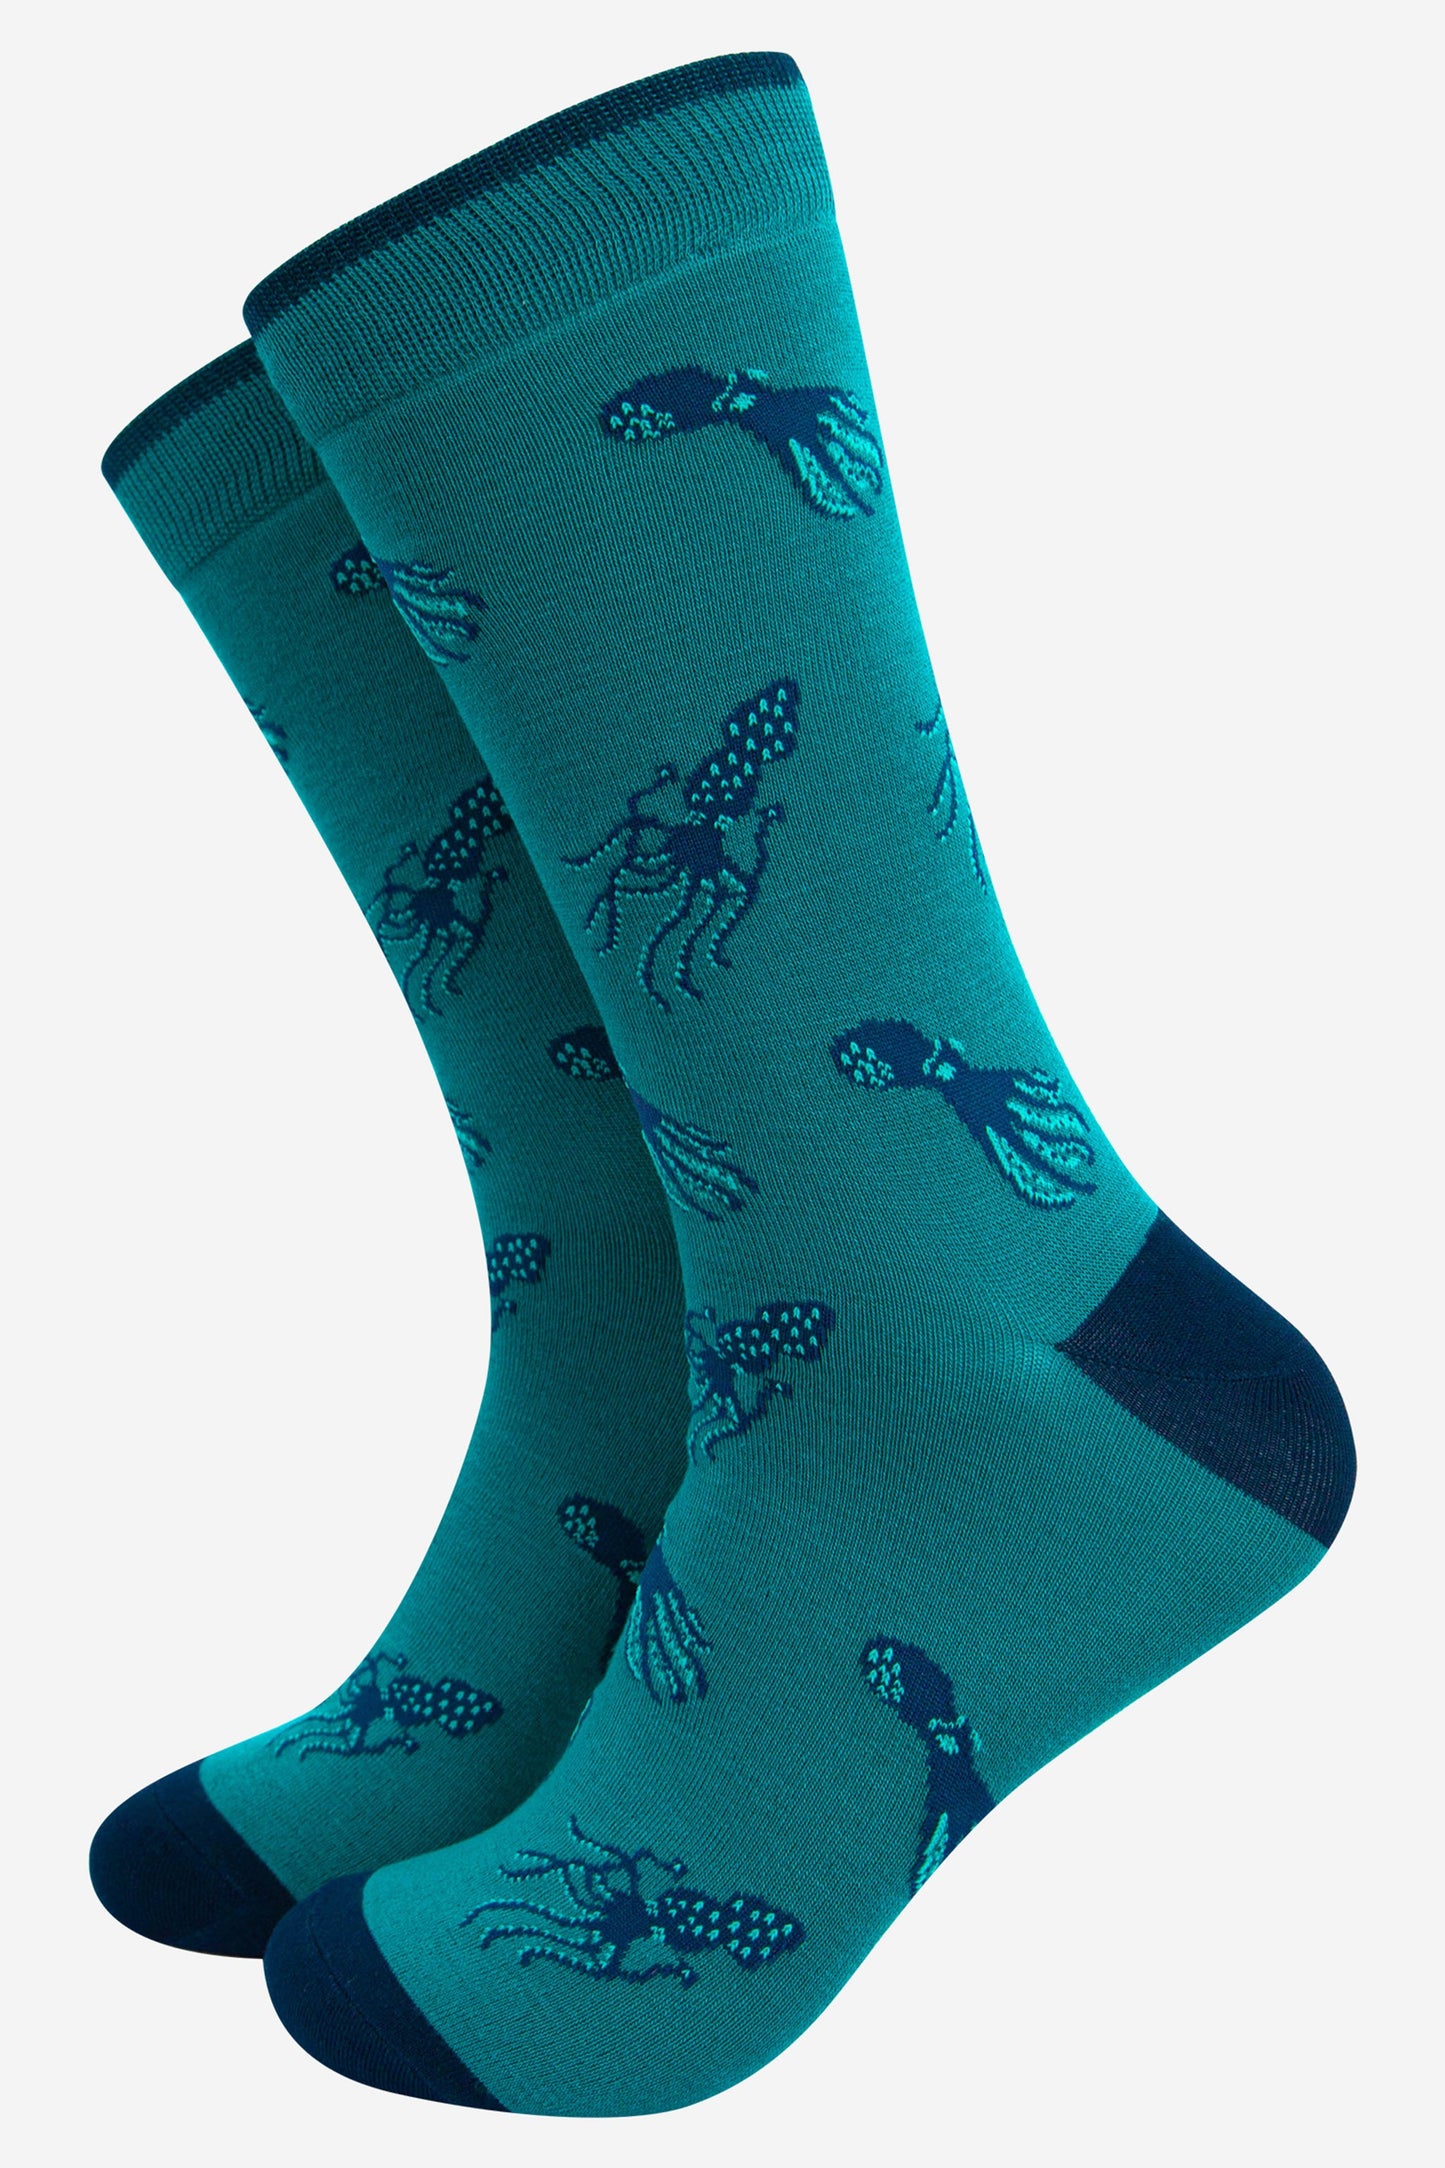 teal coloured mens bamboo dress socks with an all over blue squid and octopus print pattern